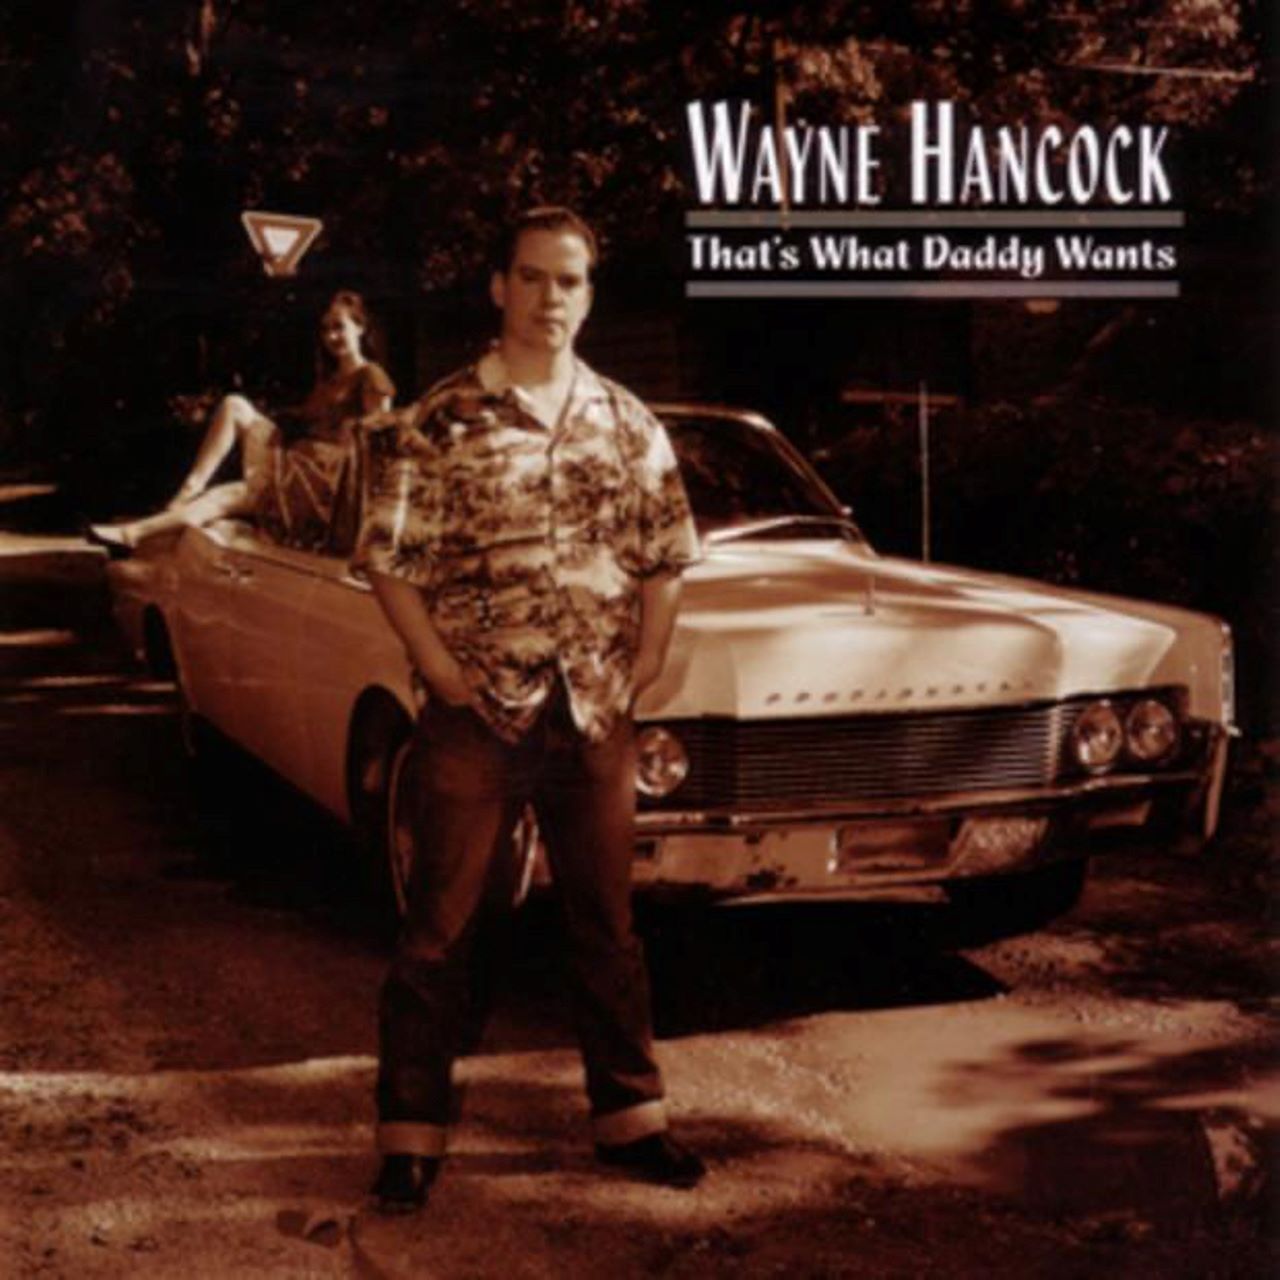 Wayne Hancock - That's What Daddy Wants cover album